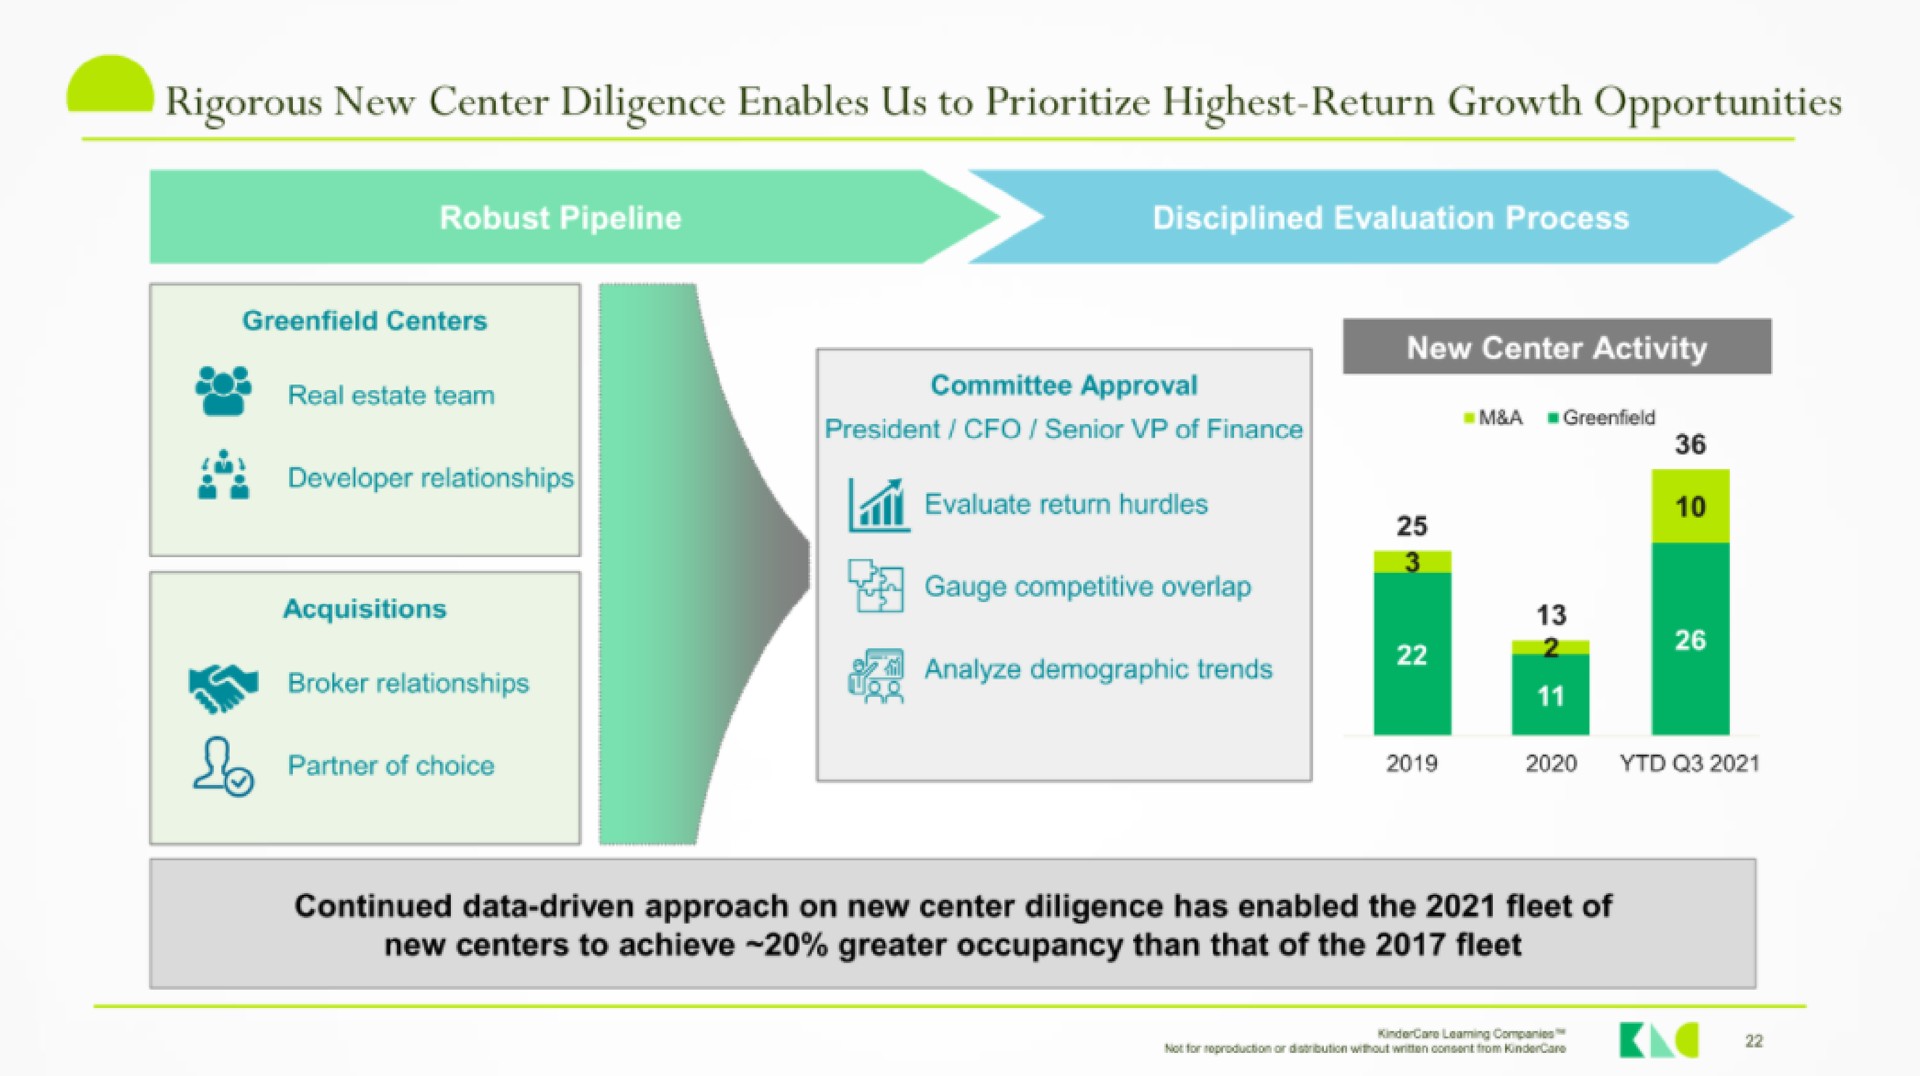 rigorous new center diligence enables us to highest return growth opportunities continued data driven approach on new center diligence has enabled the fleet of | KinderCare